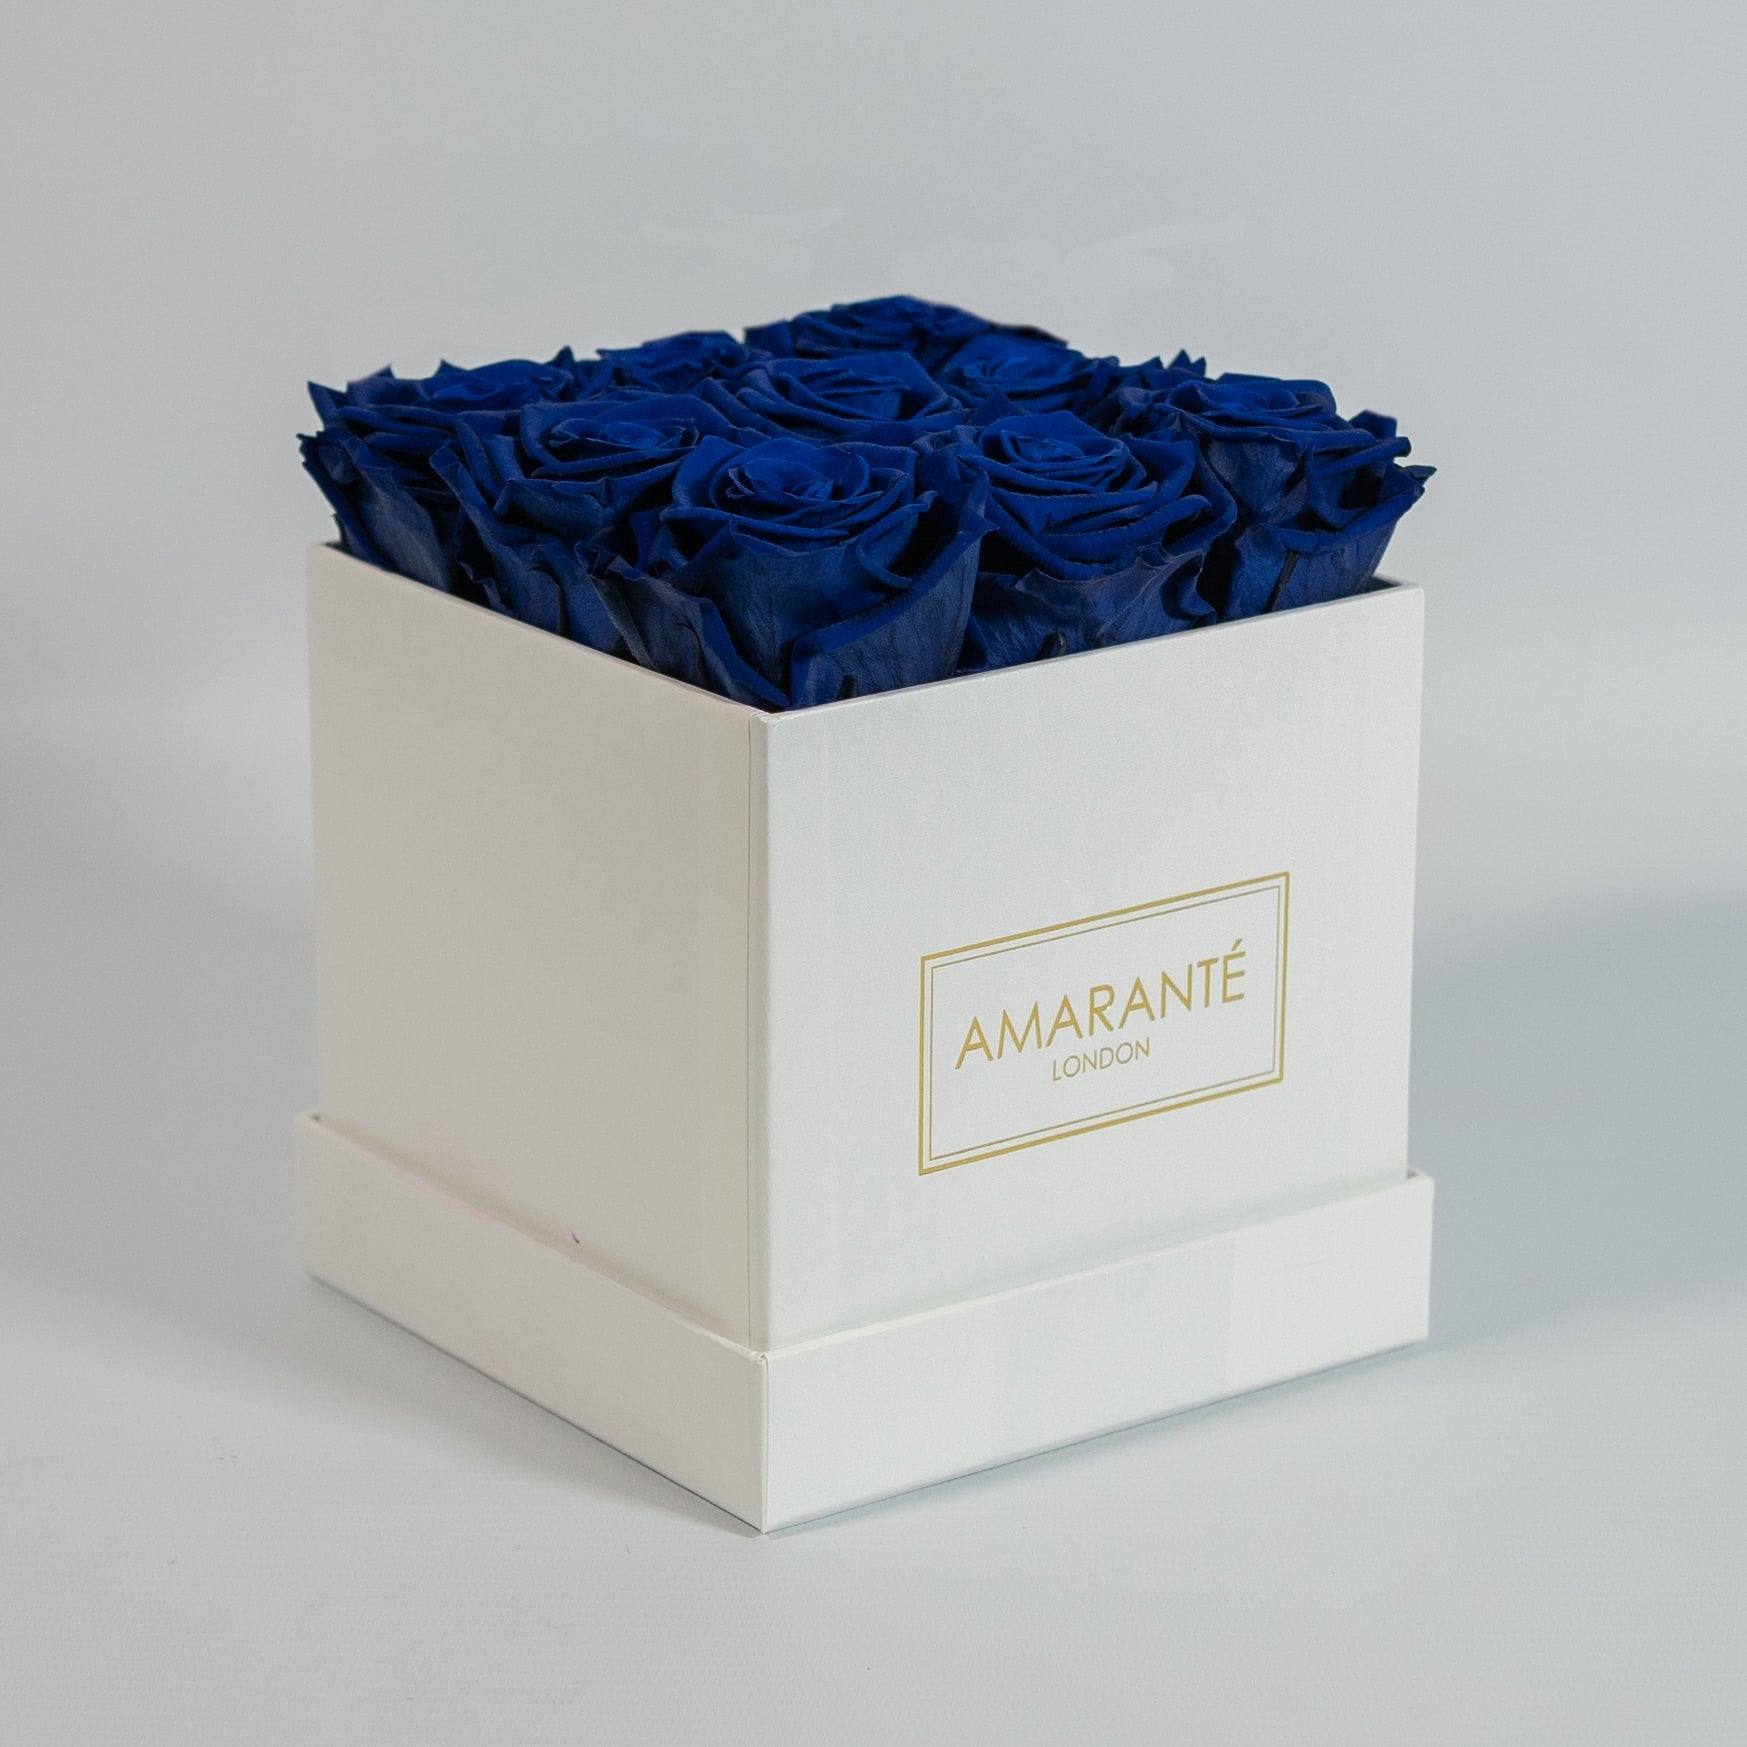 Luxurious royal blue roses indicated in a sophisticated white box 